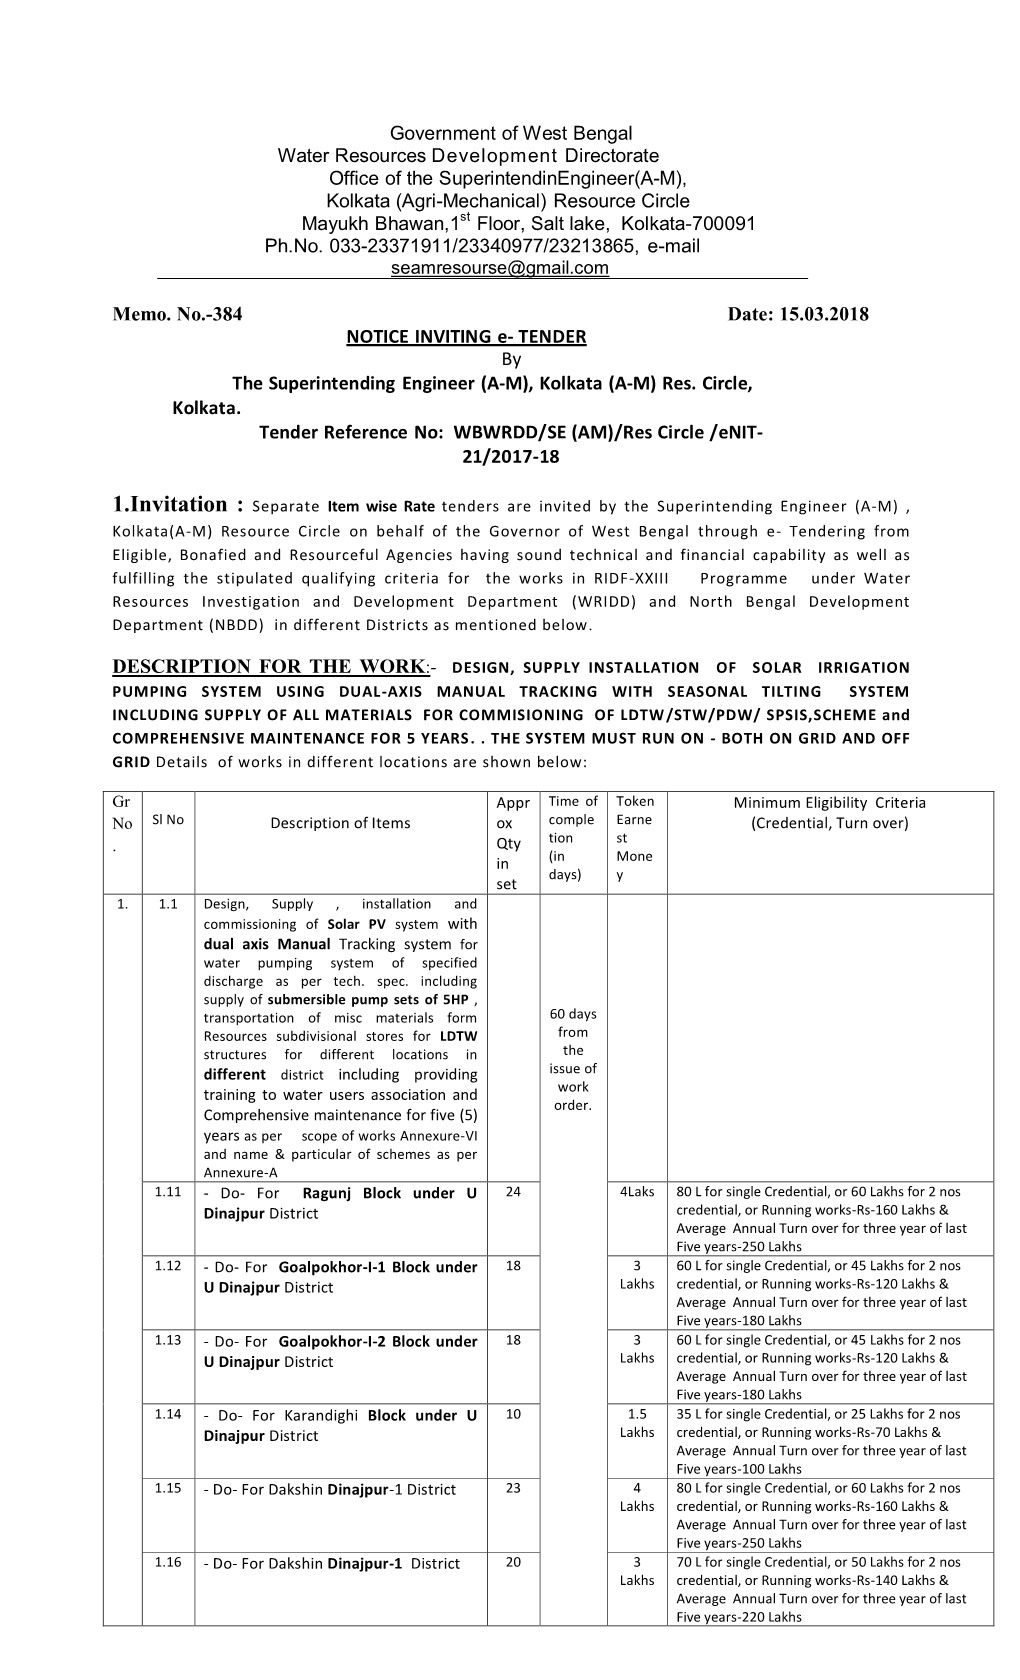 15.03.2018 NOTICE INVITING E- TENDER by the Superintending Engineer (A-M), Kolkata (A-M) Res